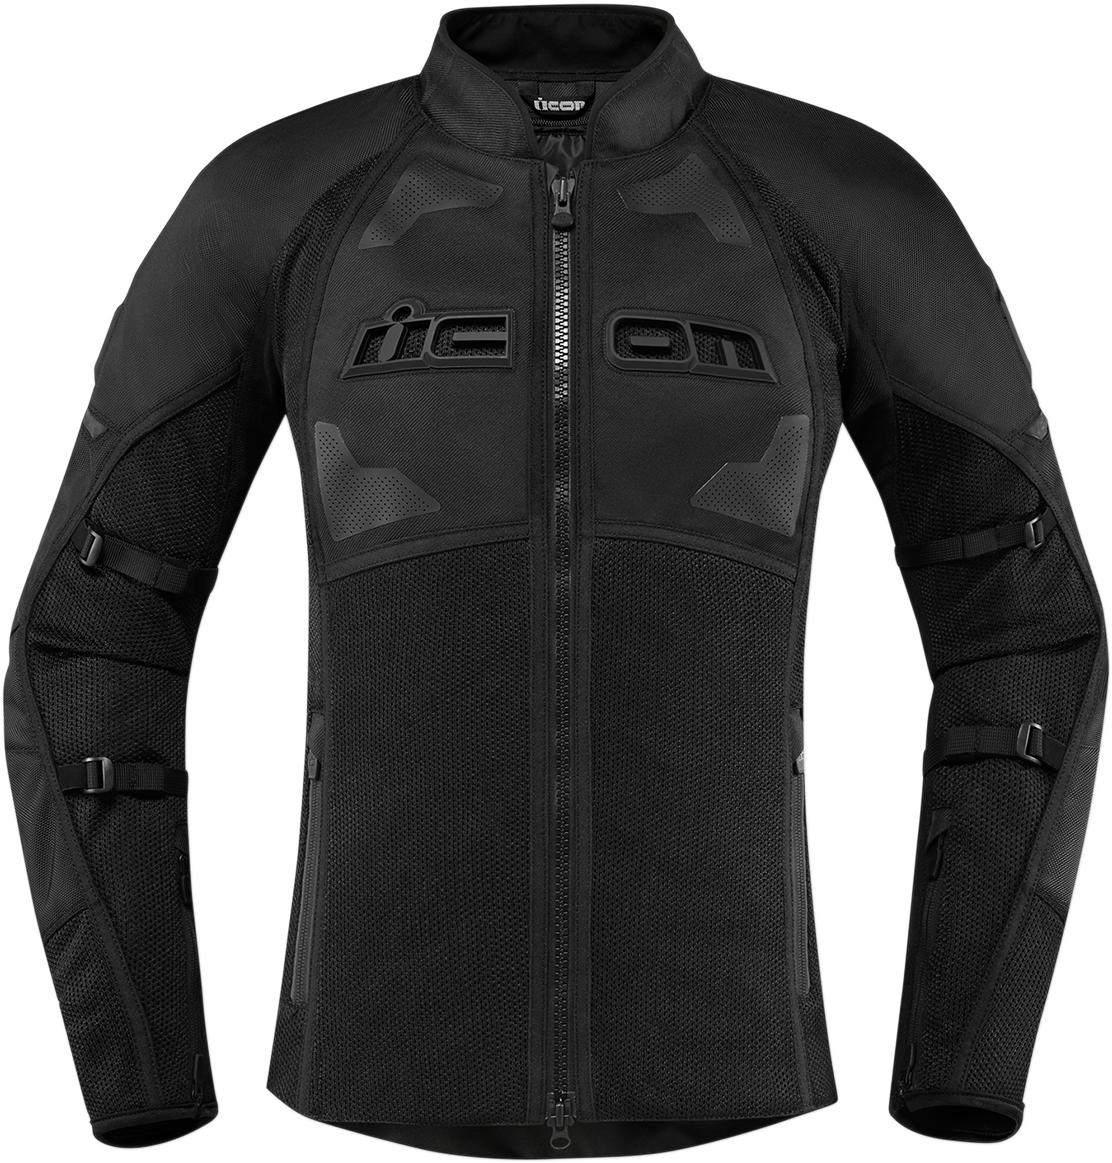 ICON Women's Contra2™ Jacket - Stealth - XL 2822-1170